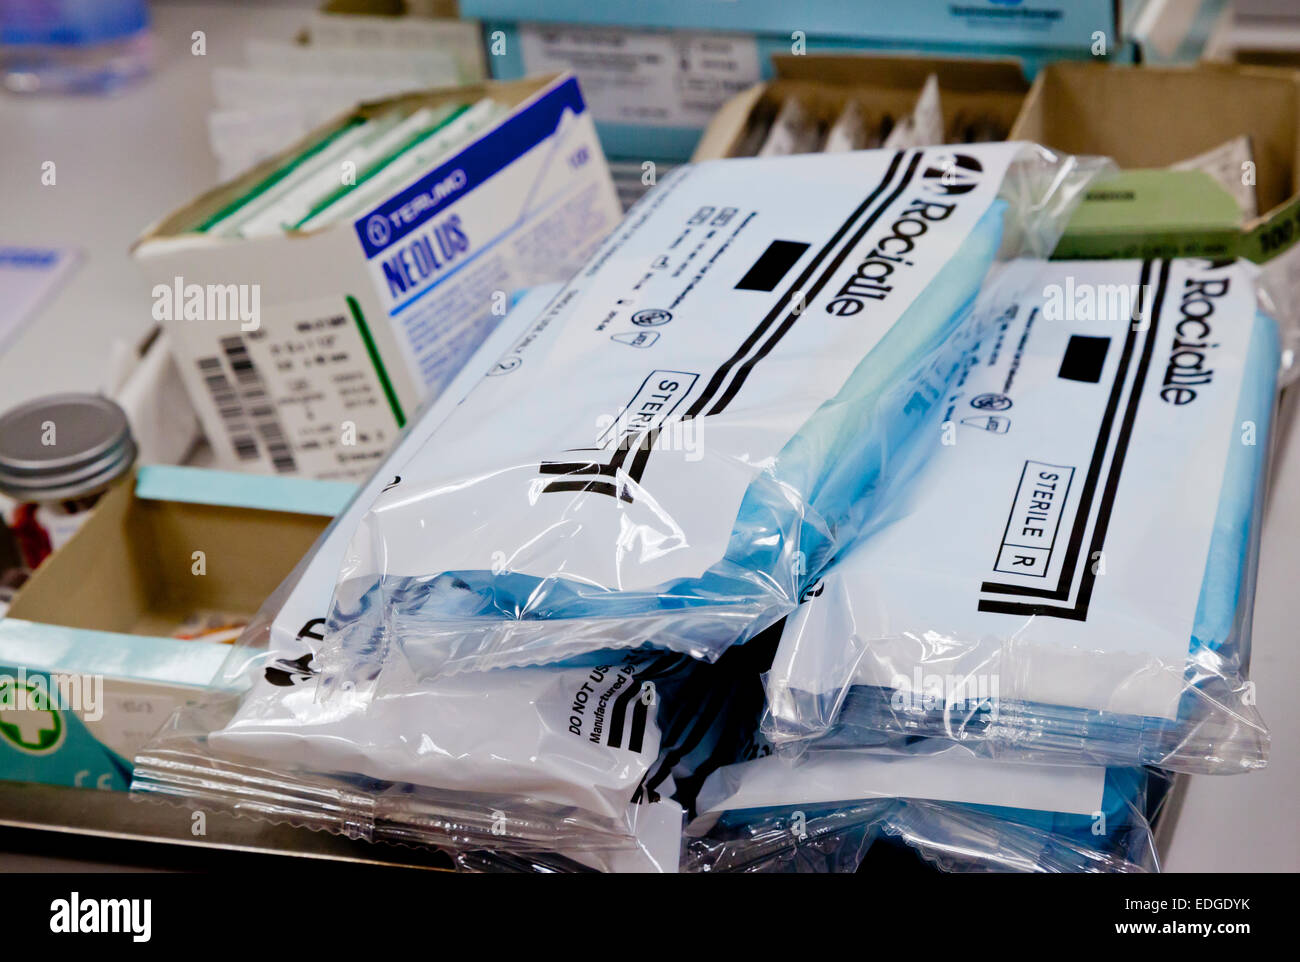 Medical supplies waiting to be used in a British National Health Service NHS hospital Stock Photo